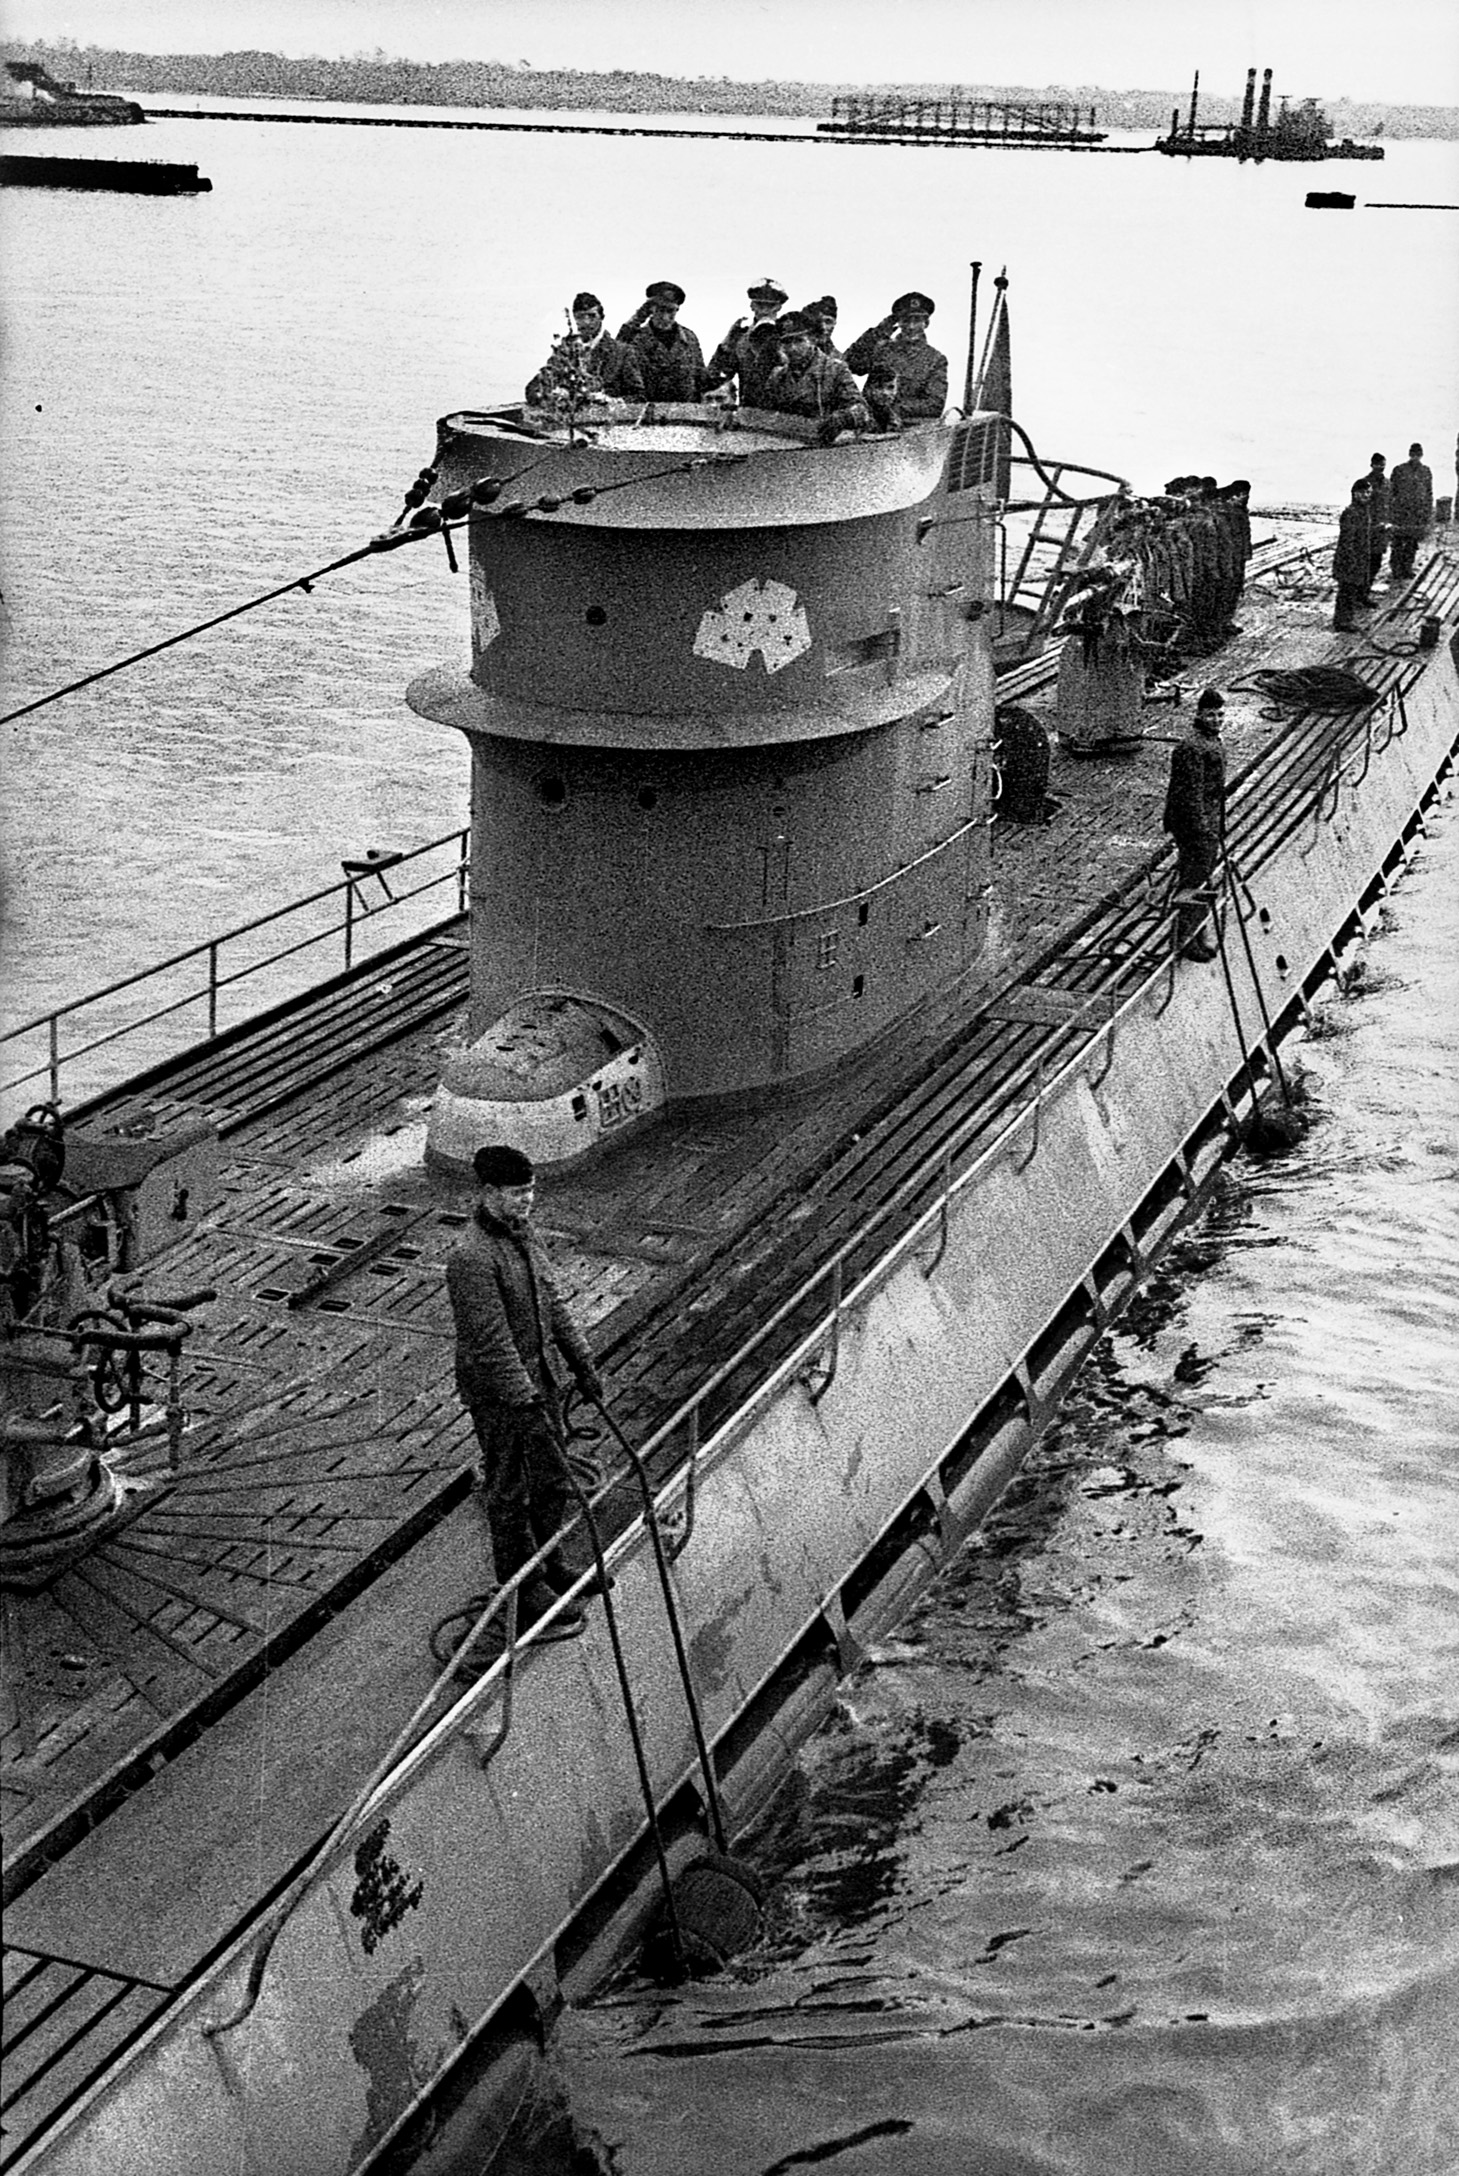 The German U-Boat U-107 arrives at its port in Lorient, France, in November 1941. The U-107 was attacking the merchant ship SS Albert Gallatin during a war patrol when the U.S. Navy airship  K-34 arrived and drove the U-boat away. 